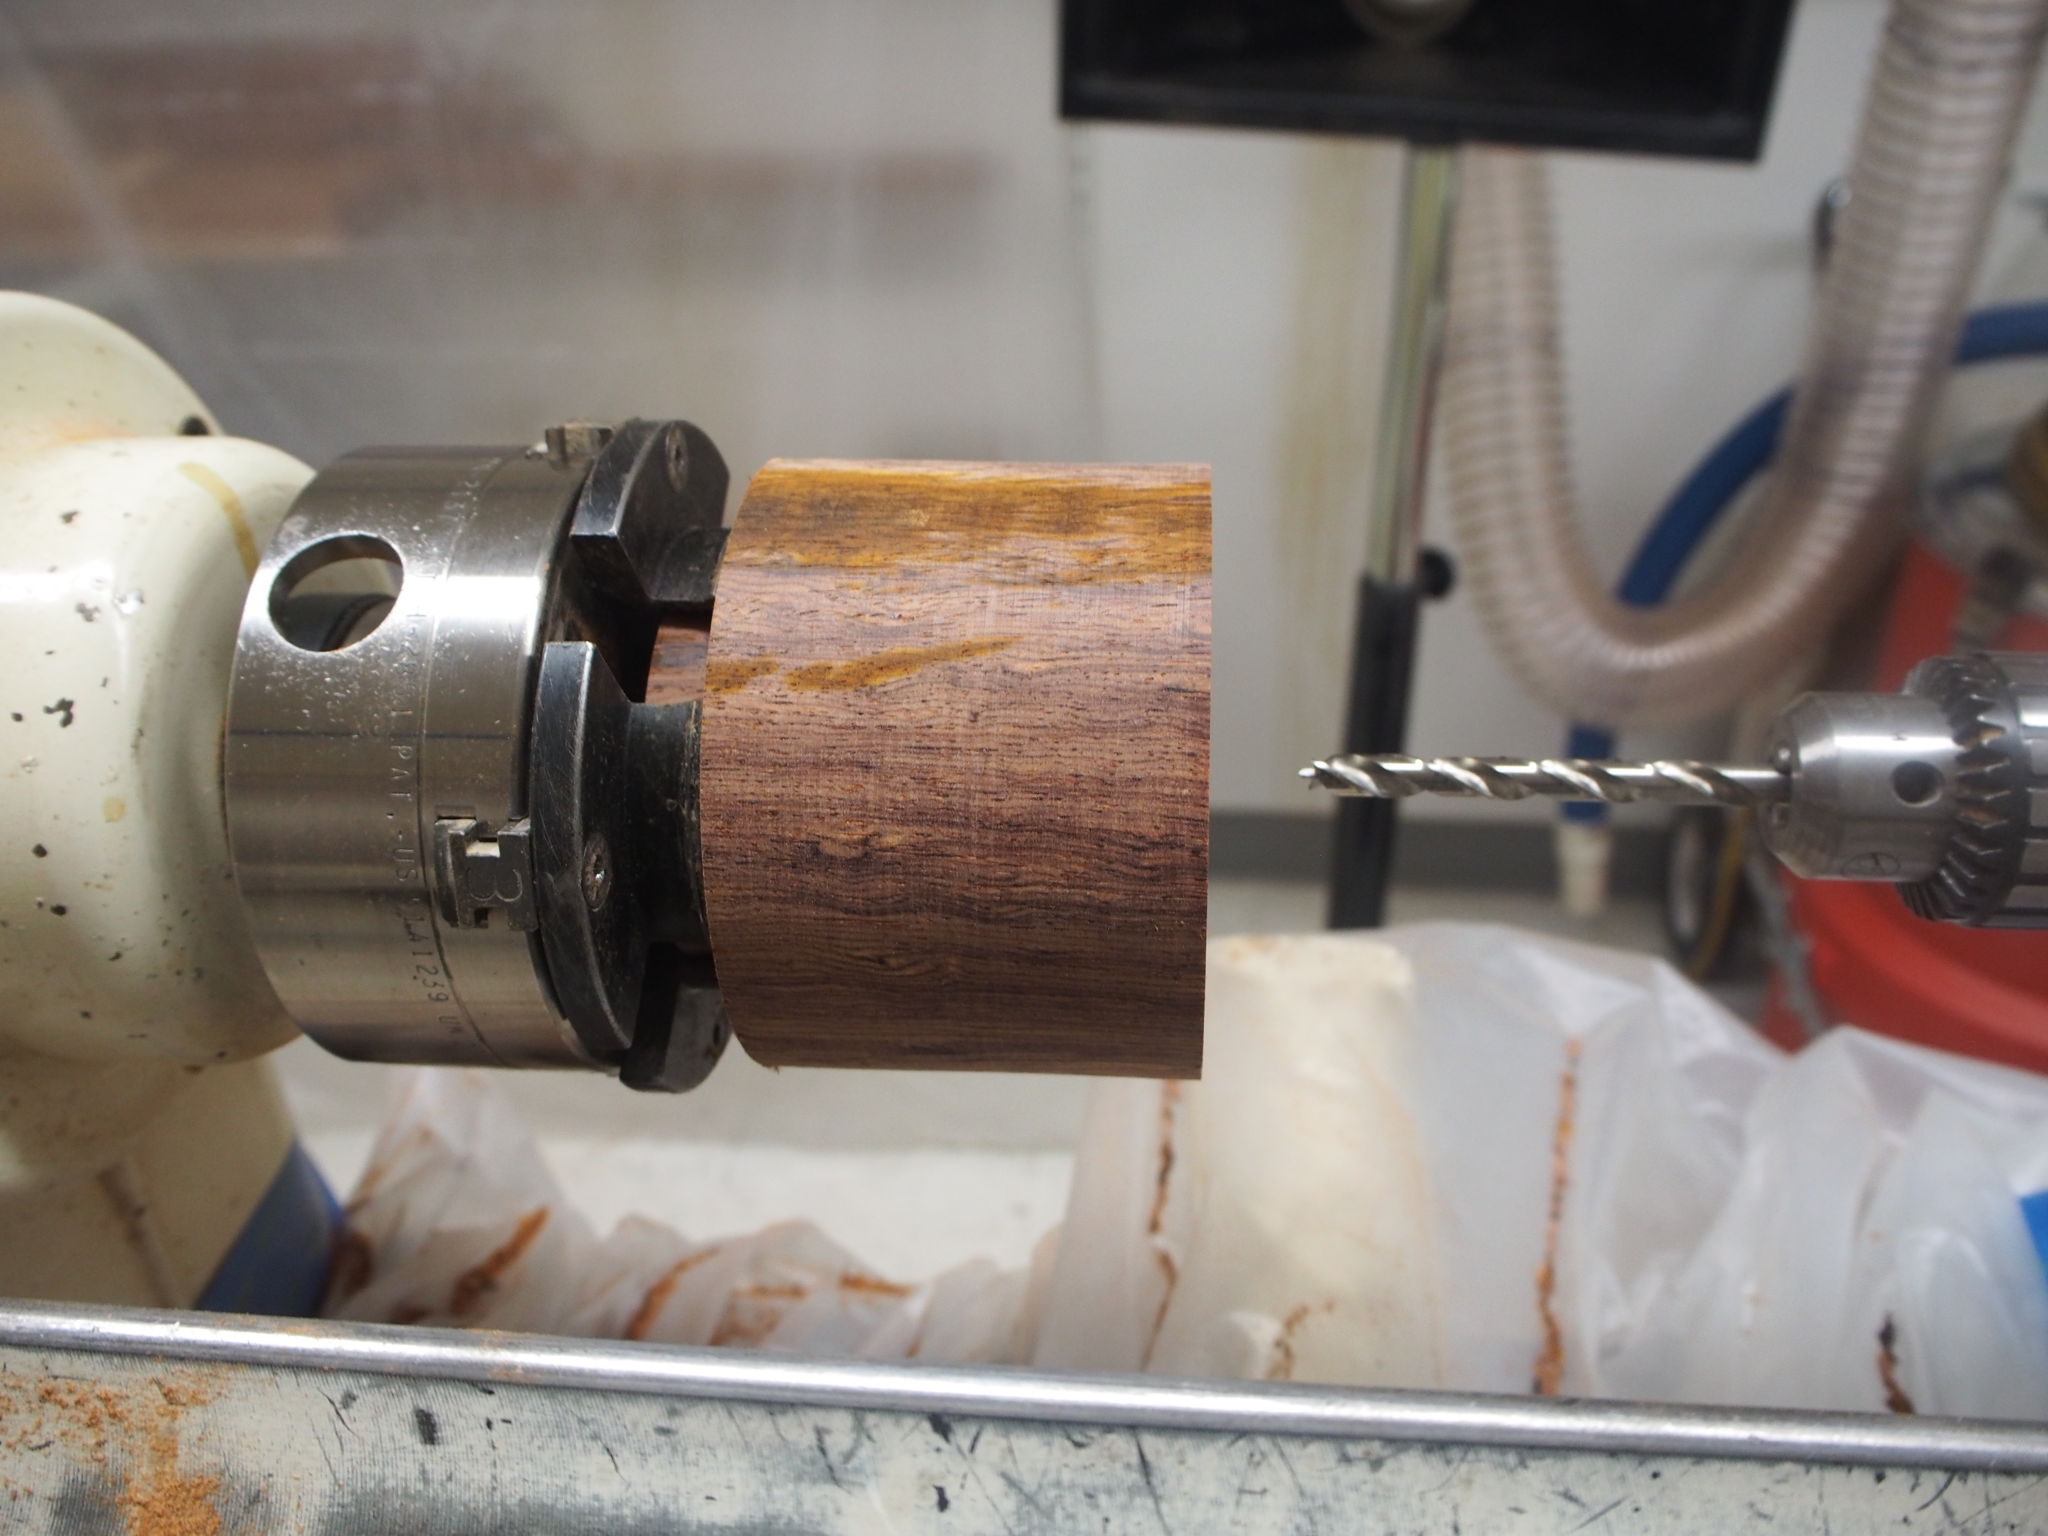 Drilling the spindle hole